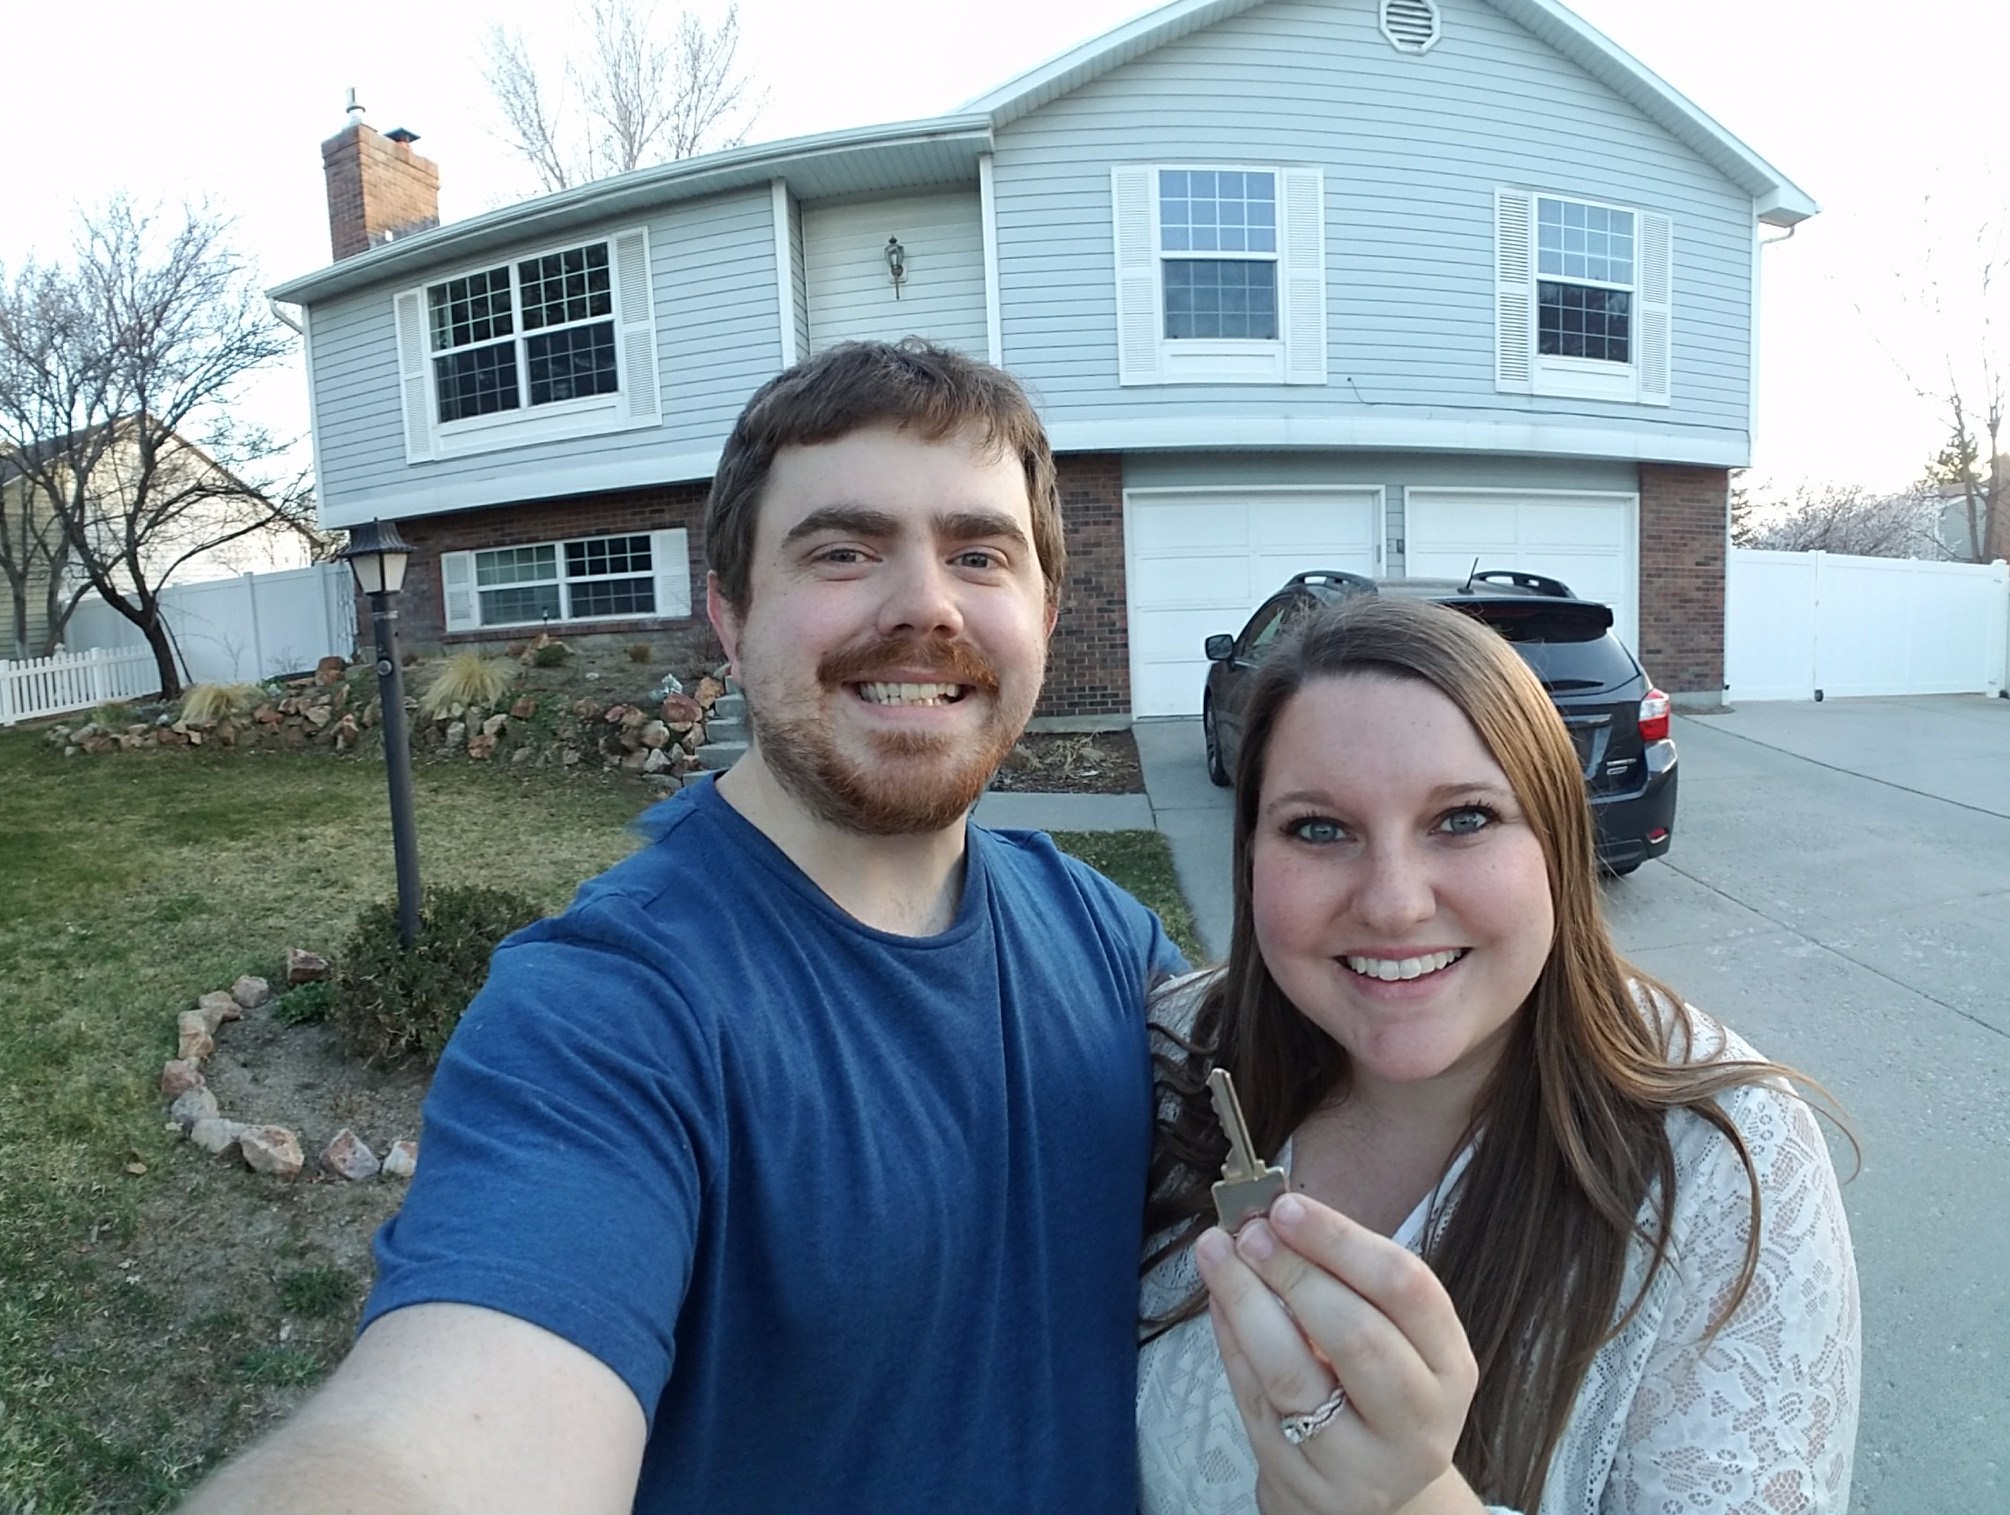 Buying Our First Home